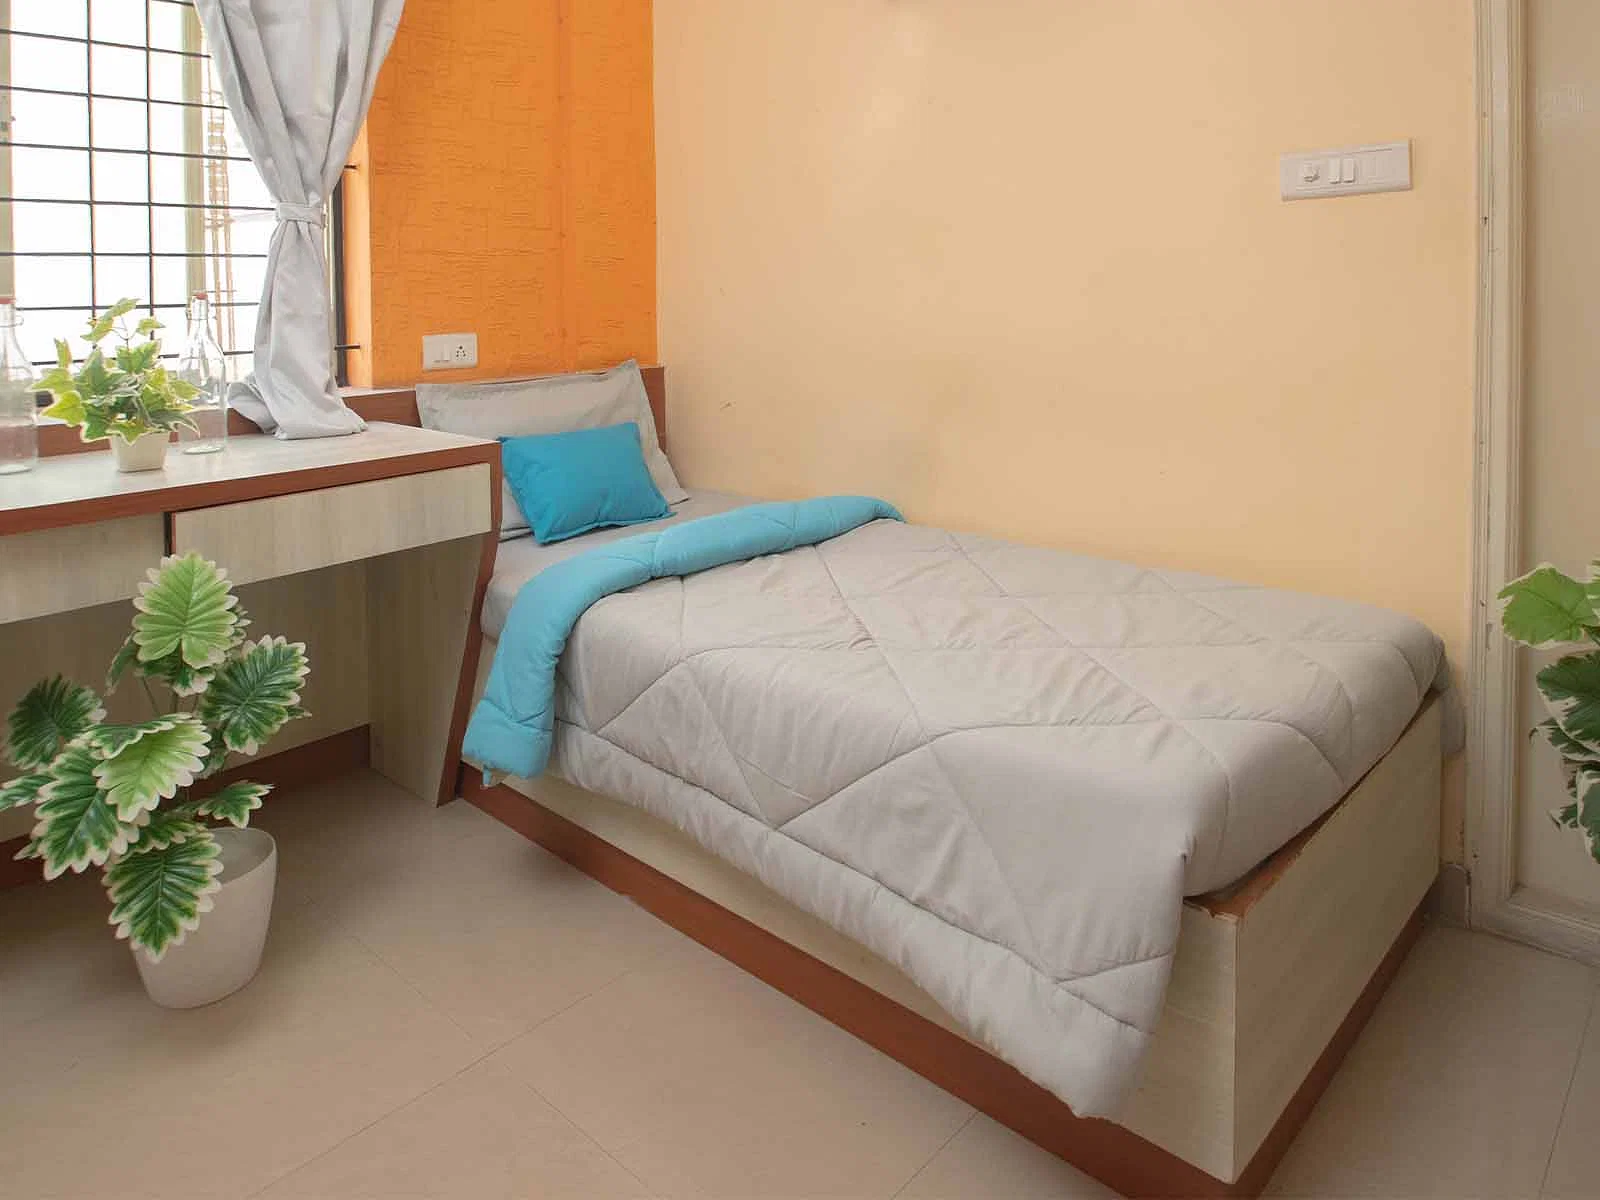 pgs in Bannerghatta with Daily housekeeping facilities and free Wi-Fi-Zolo Heaven C